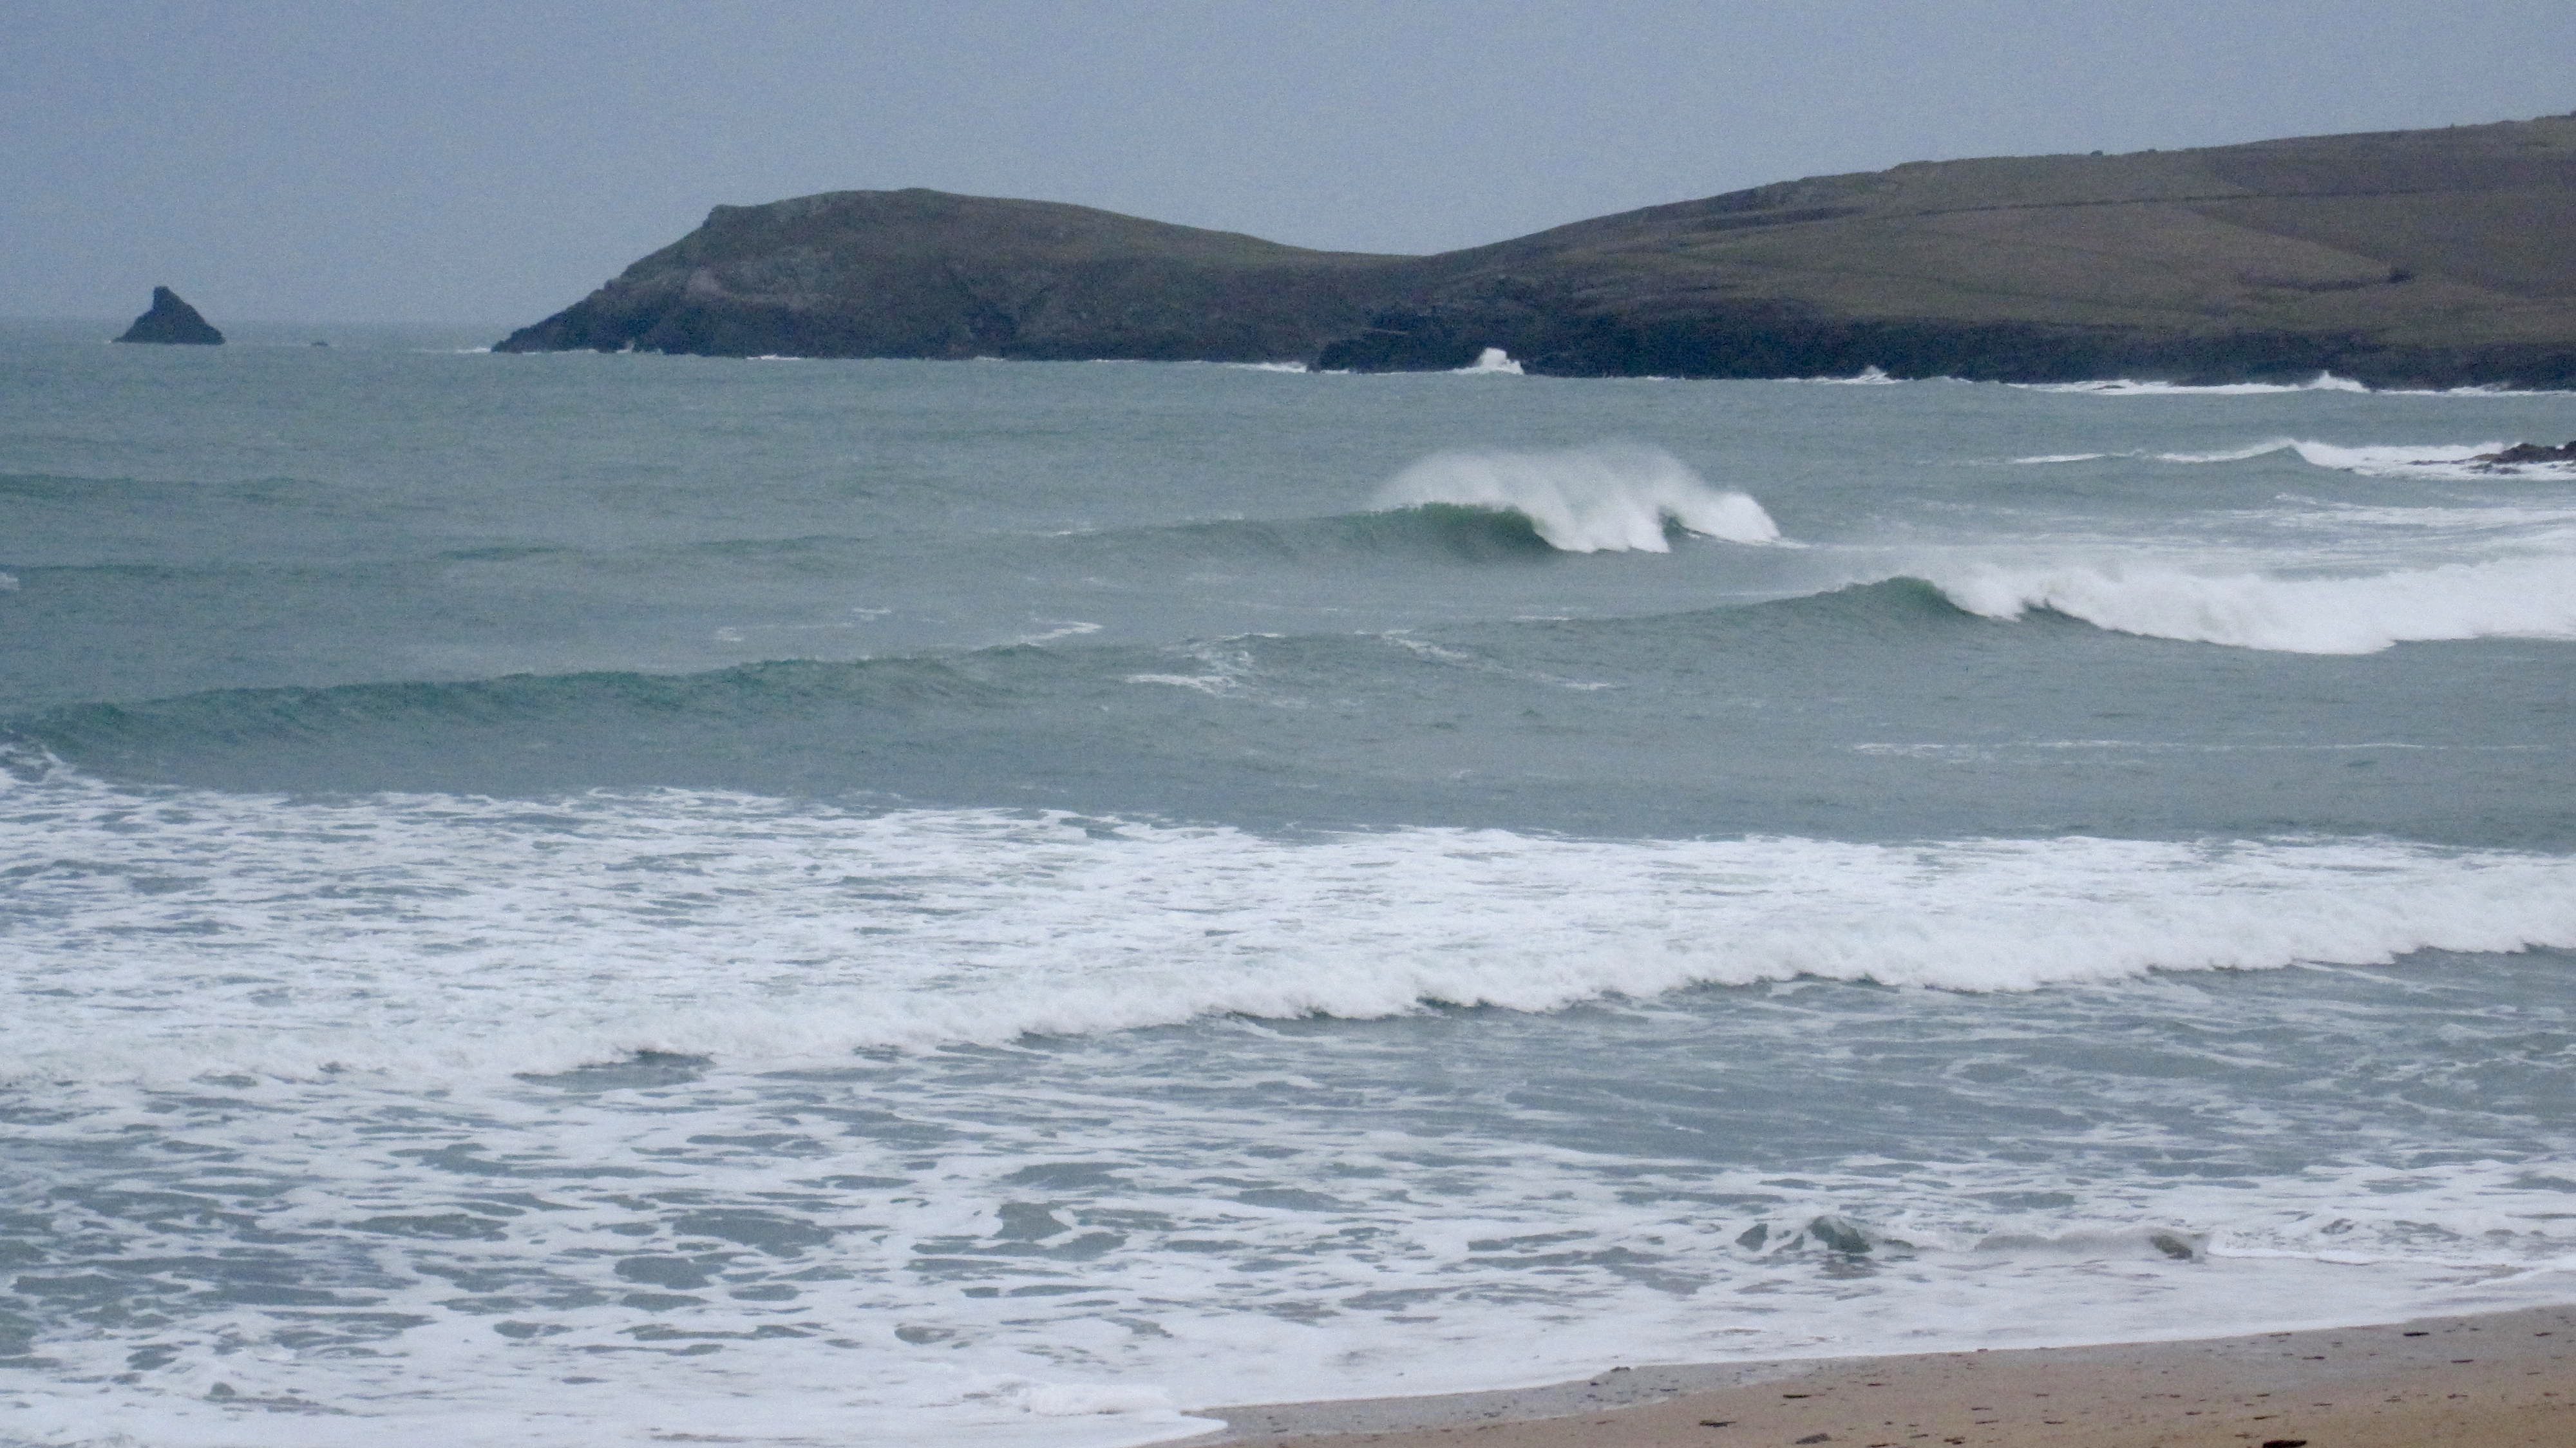 Surf Report for Monday 28th December 2015